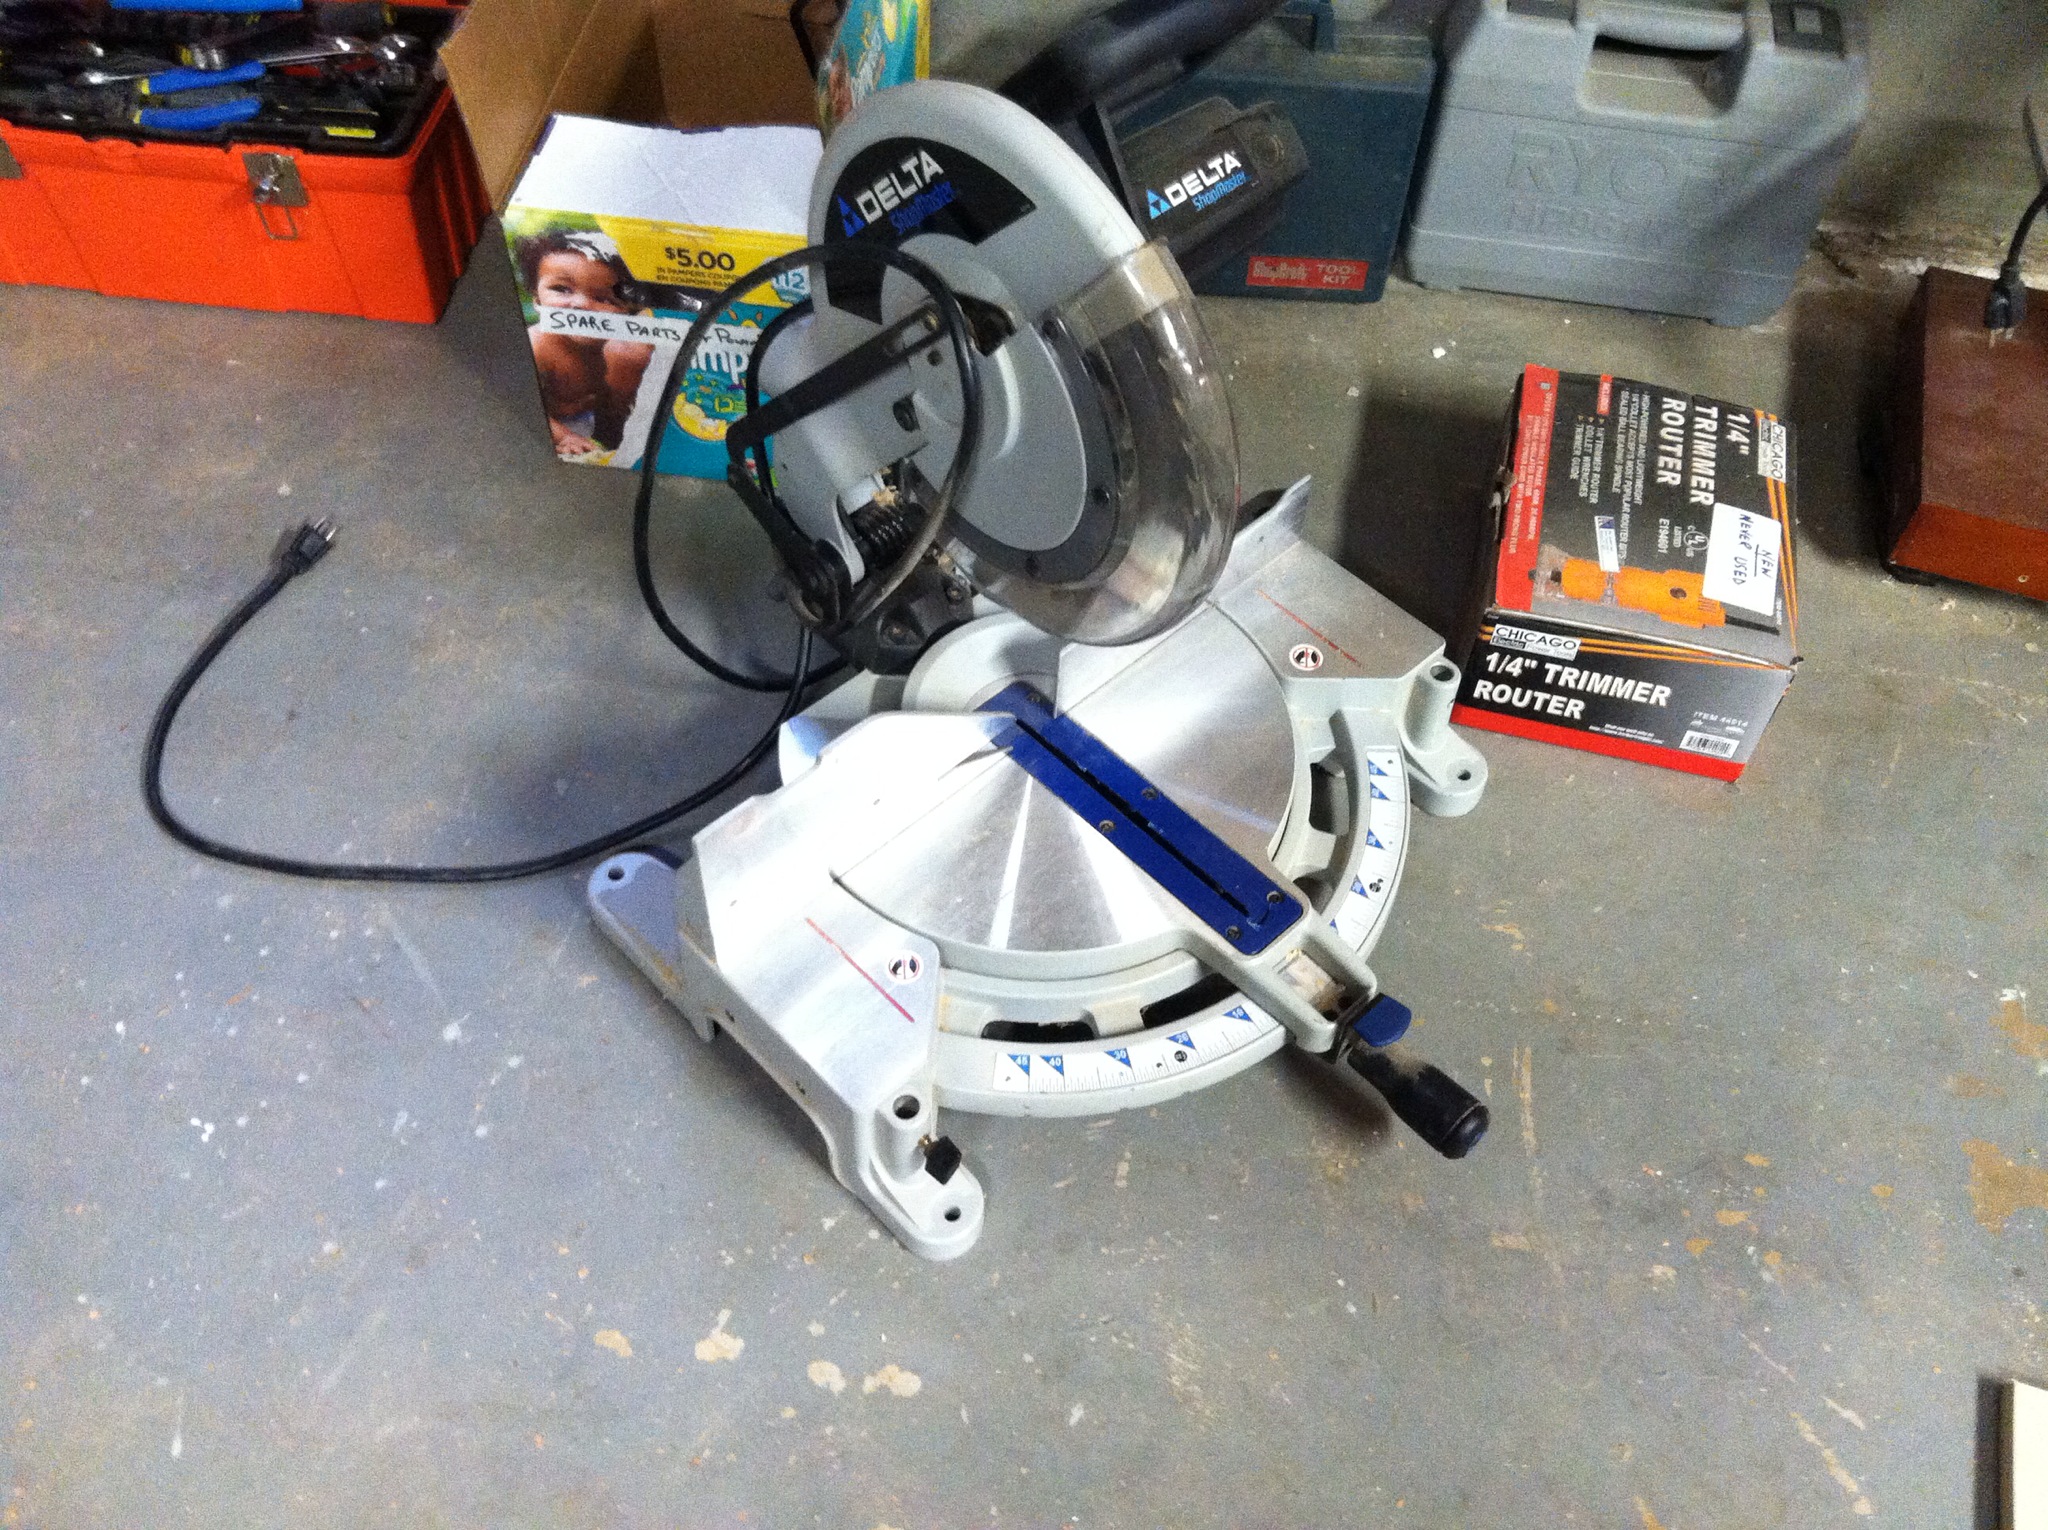 The Delta 10 inch miter saw that needs a home